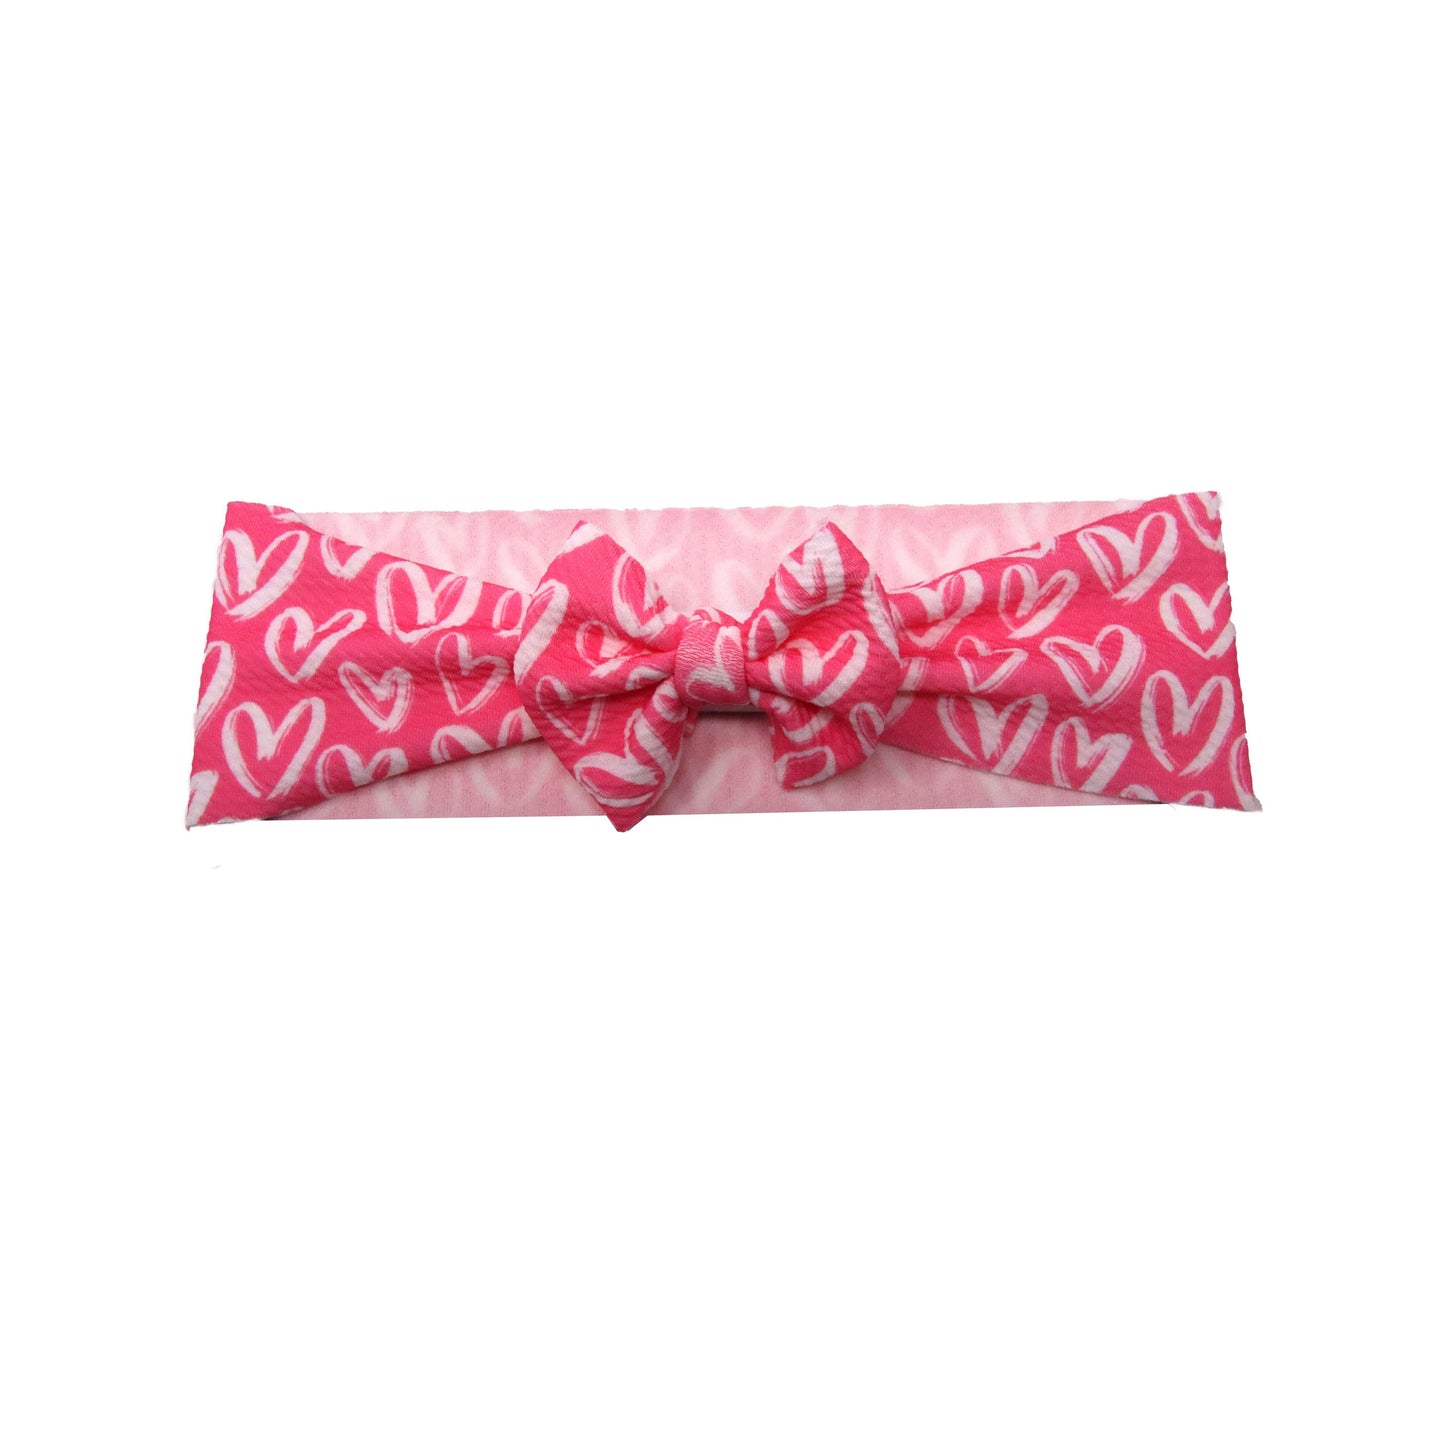 White Hearts on Pink Fabric Bow Headwrap 3"